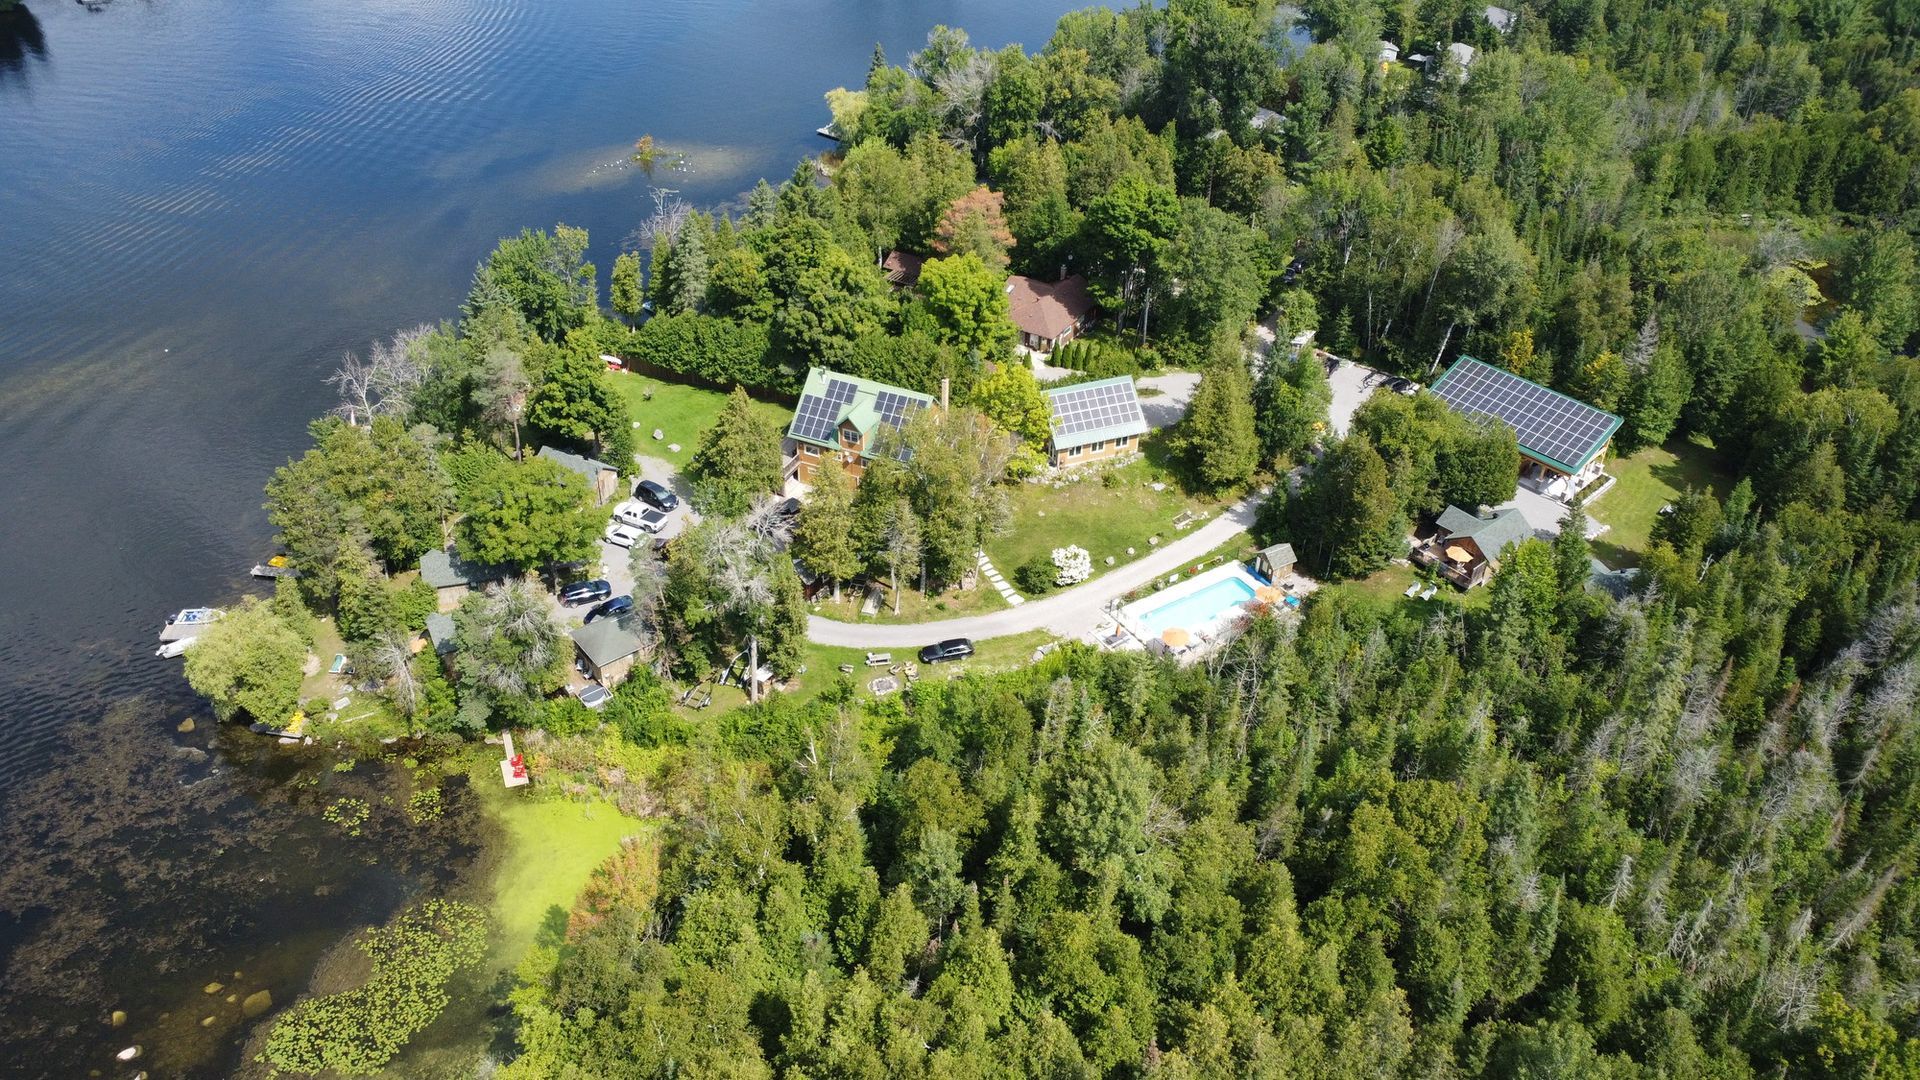 An aerial view of a house on a small island in the middle of a lake surrounded by trees.